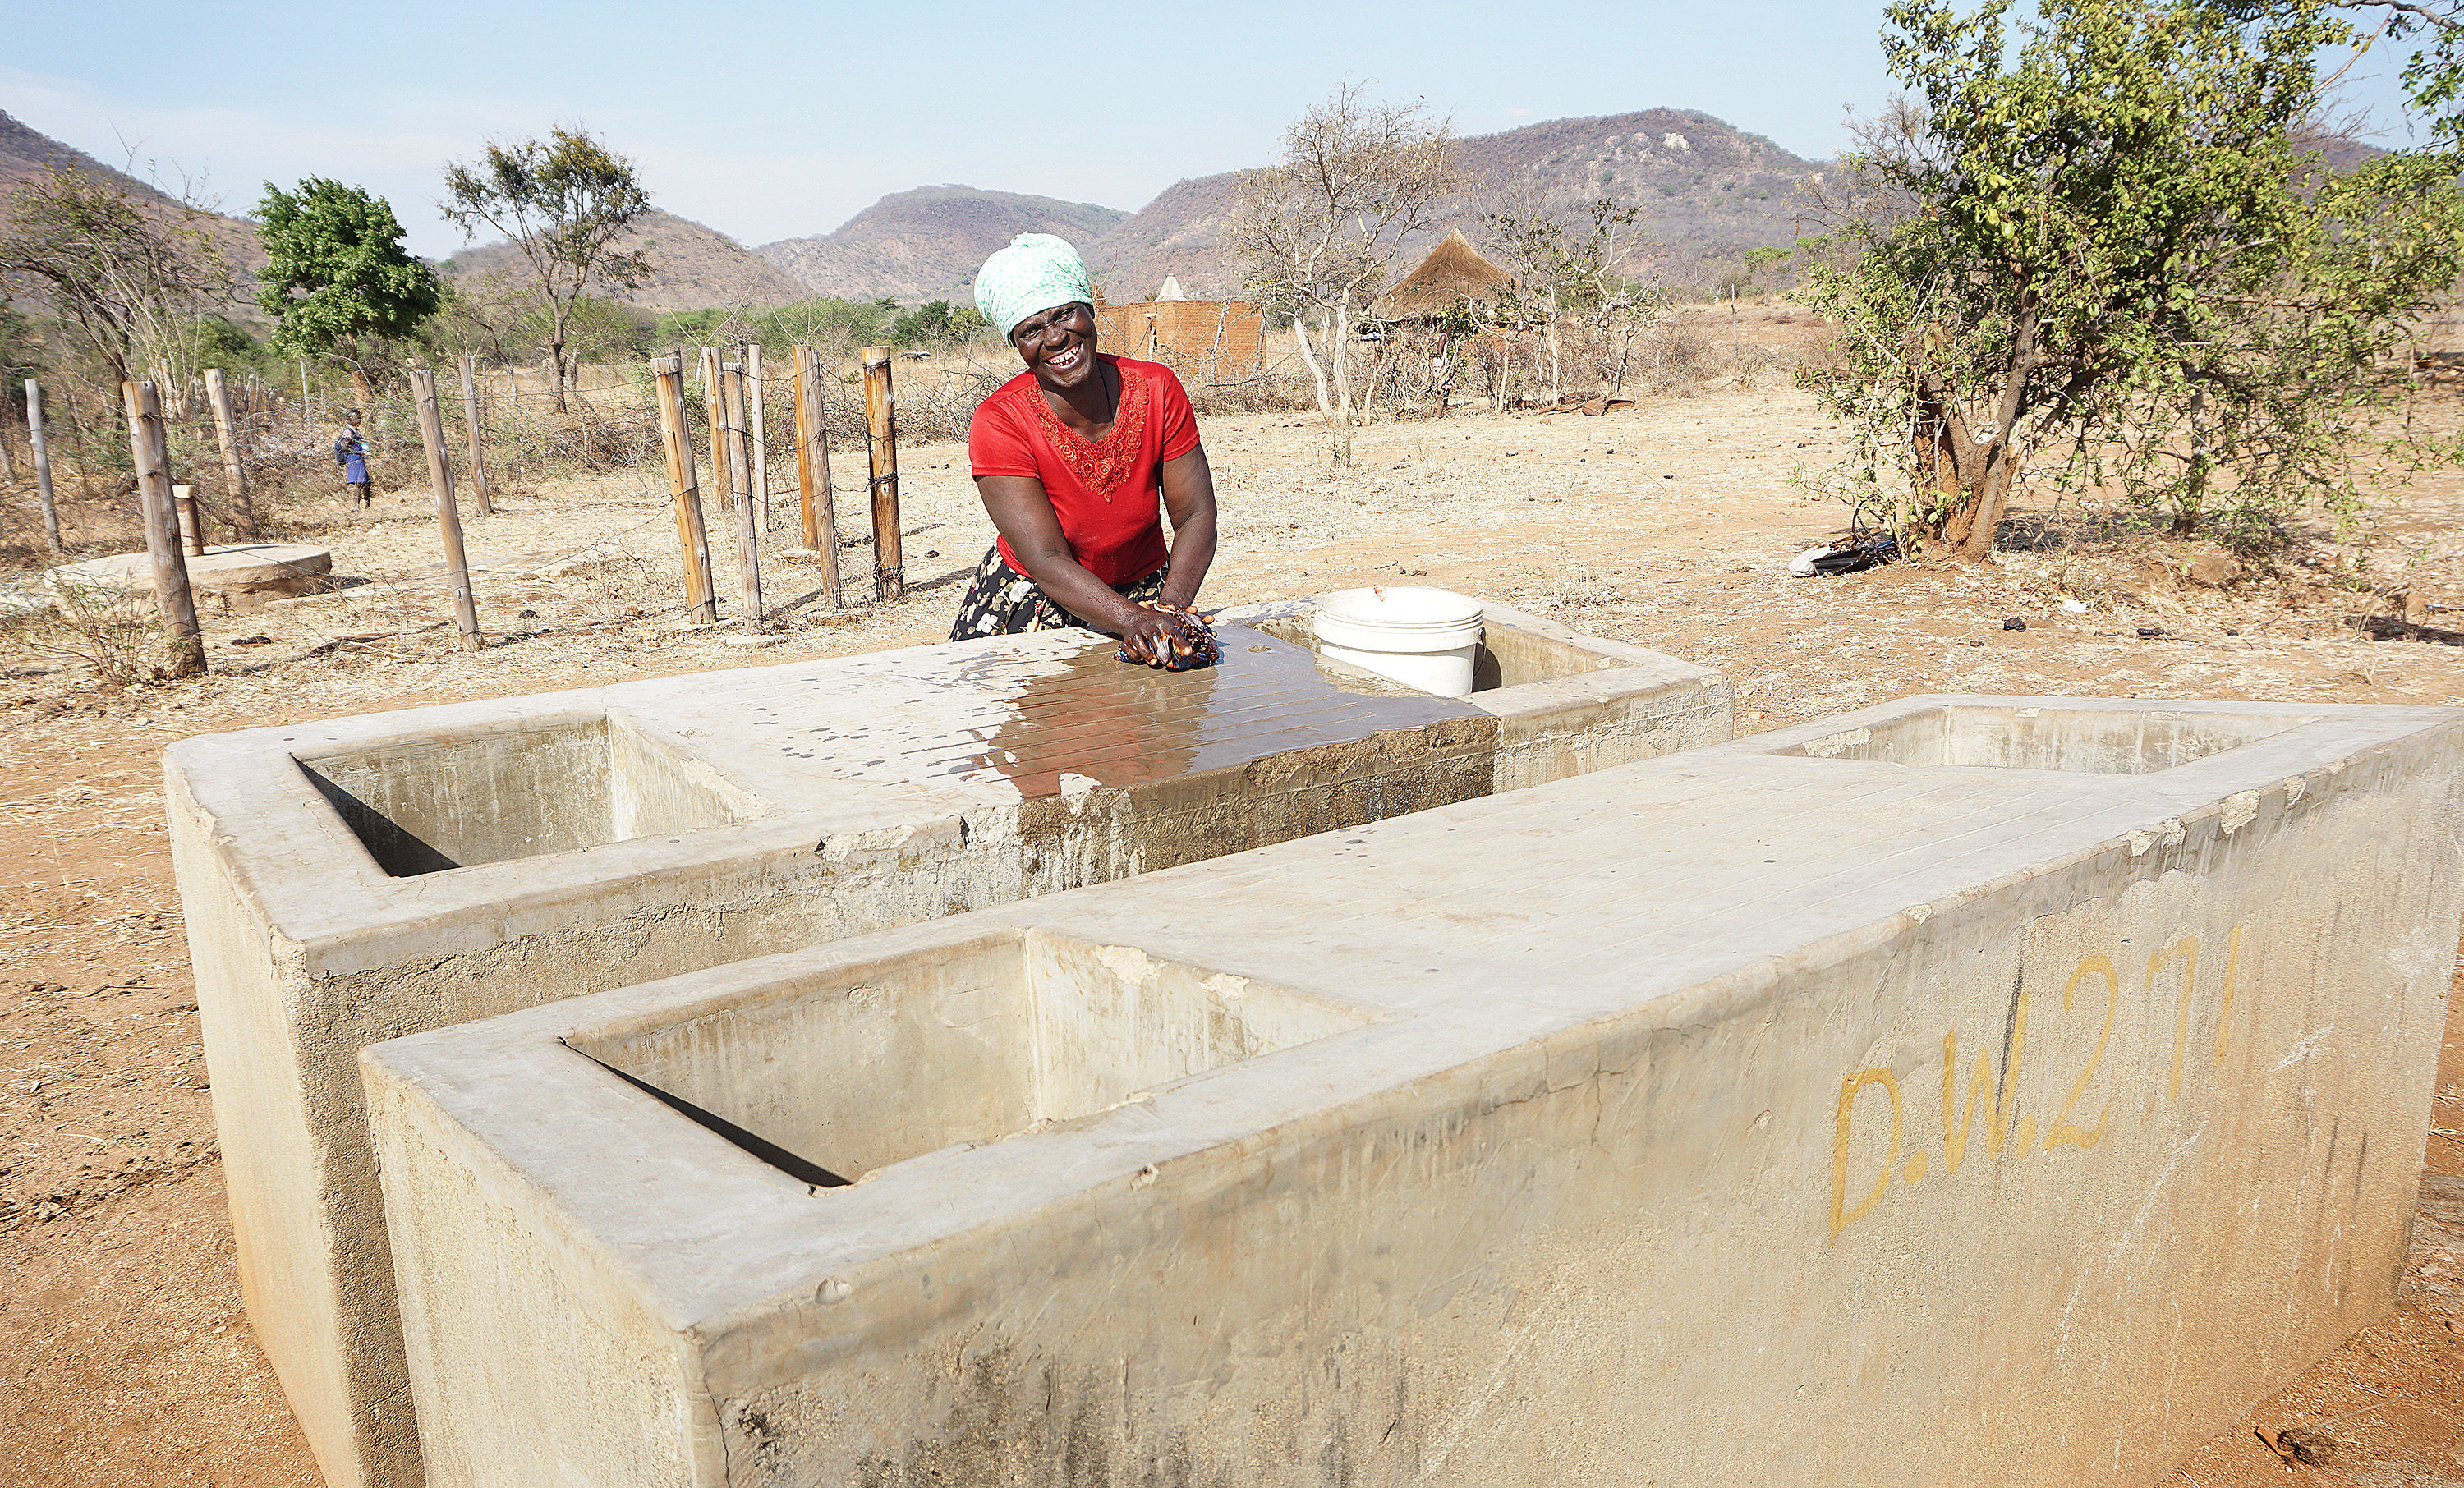 Maria Mandipaza tries out the new laundry basin donated by United Methodists from Norway. Photo by Kudzai Chingwe, UMNS.